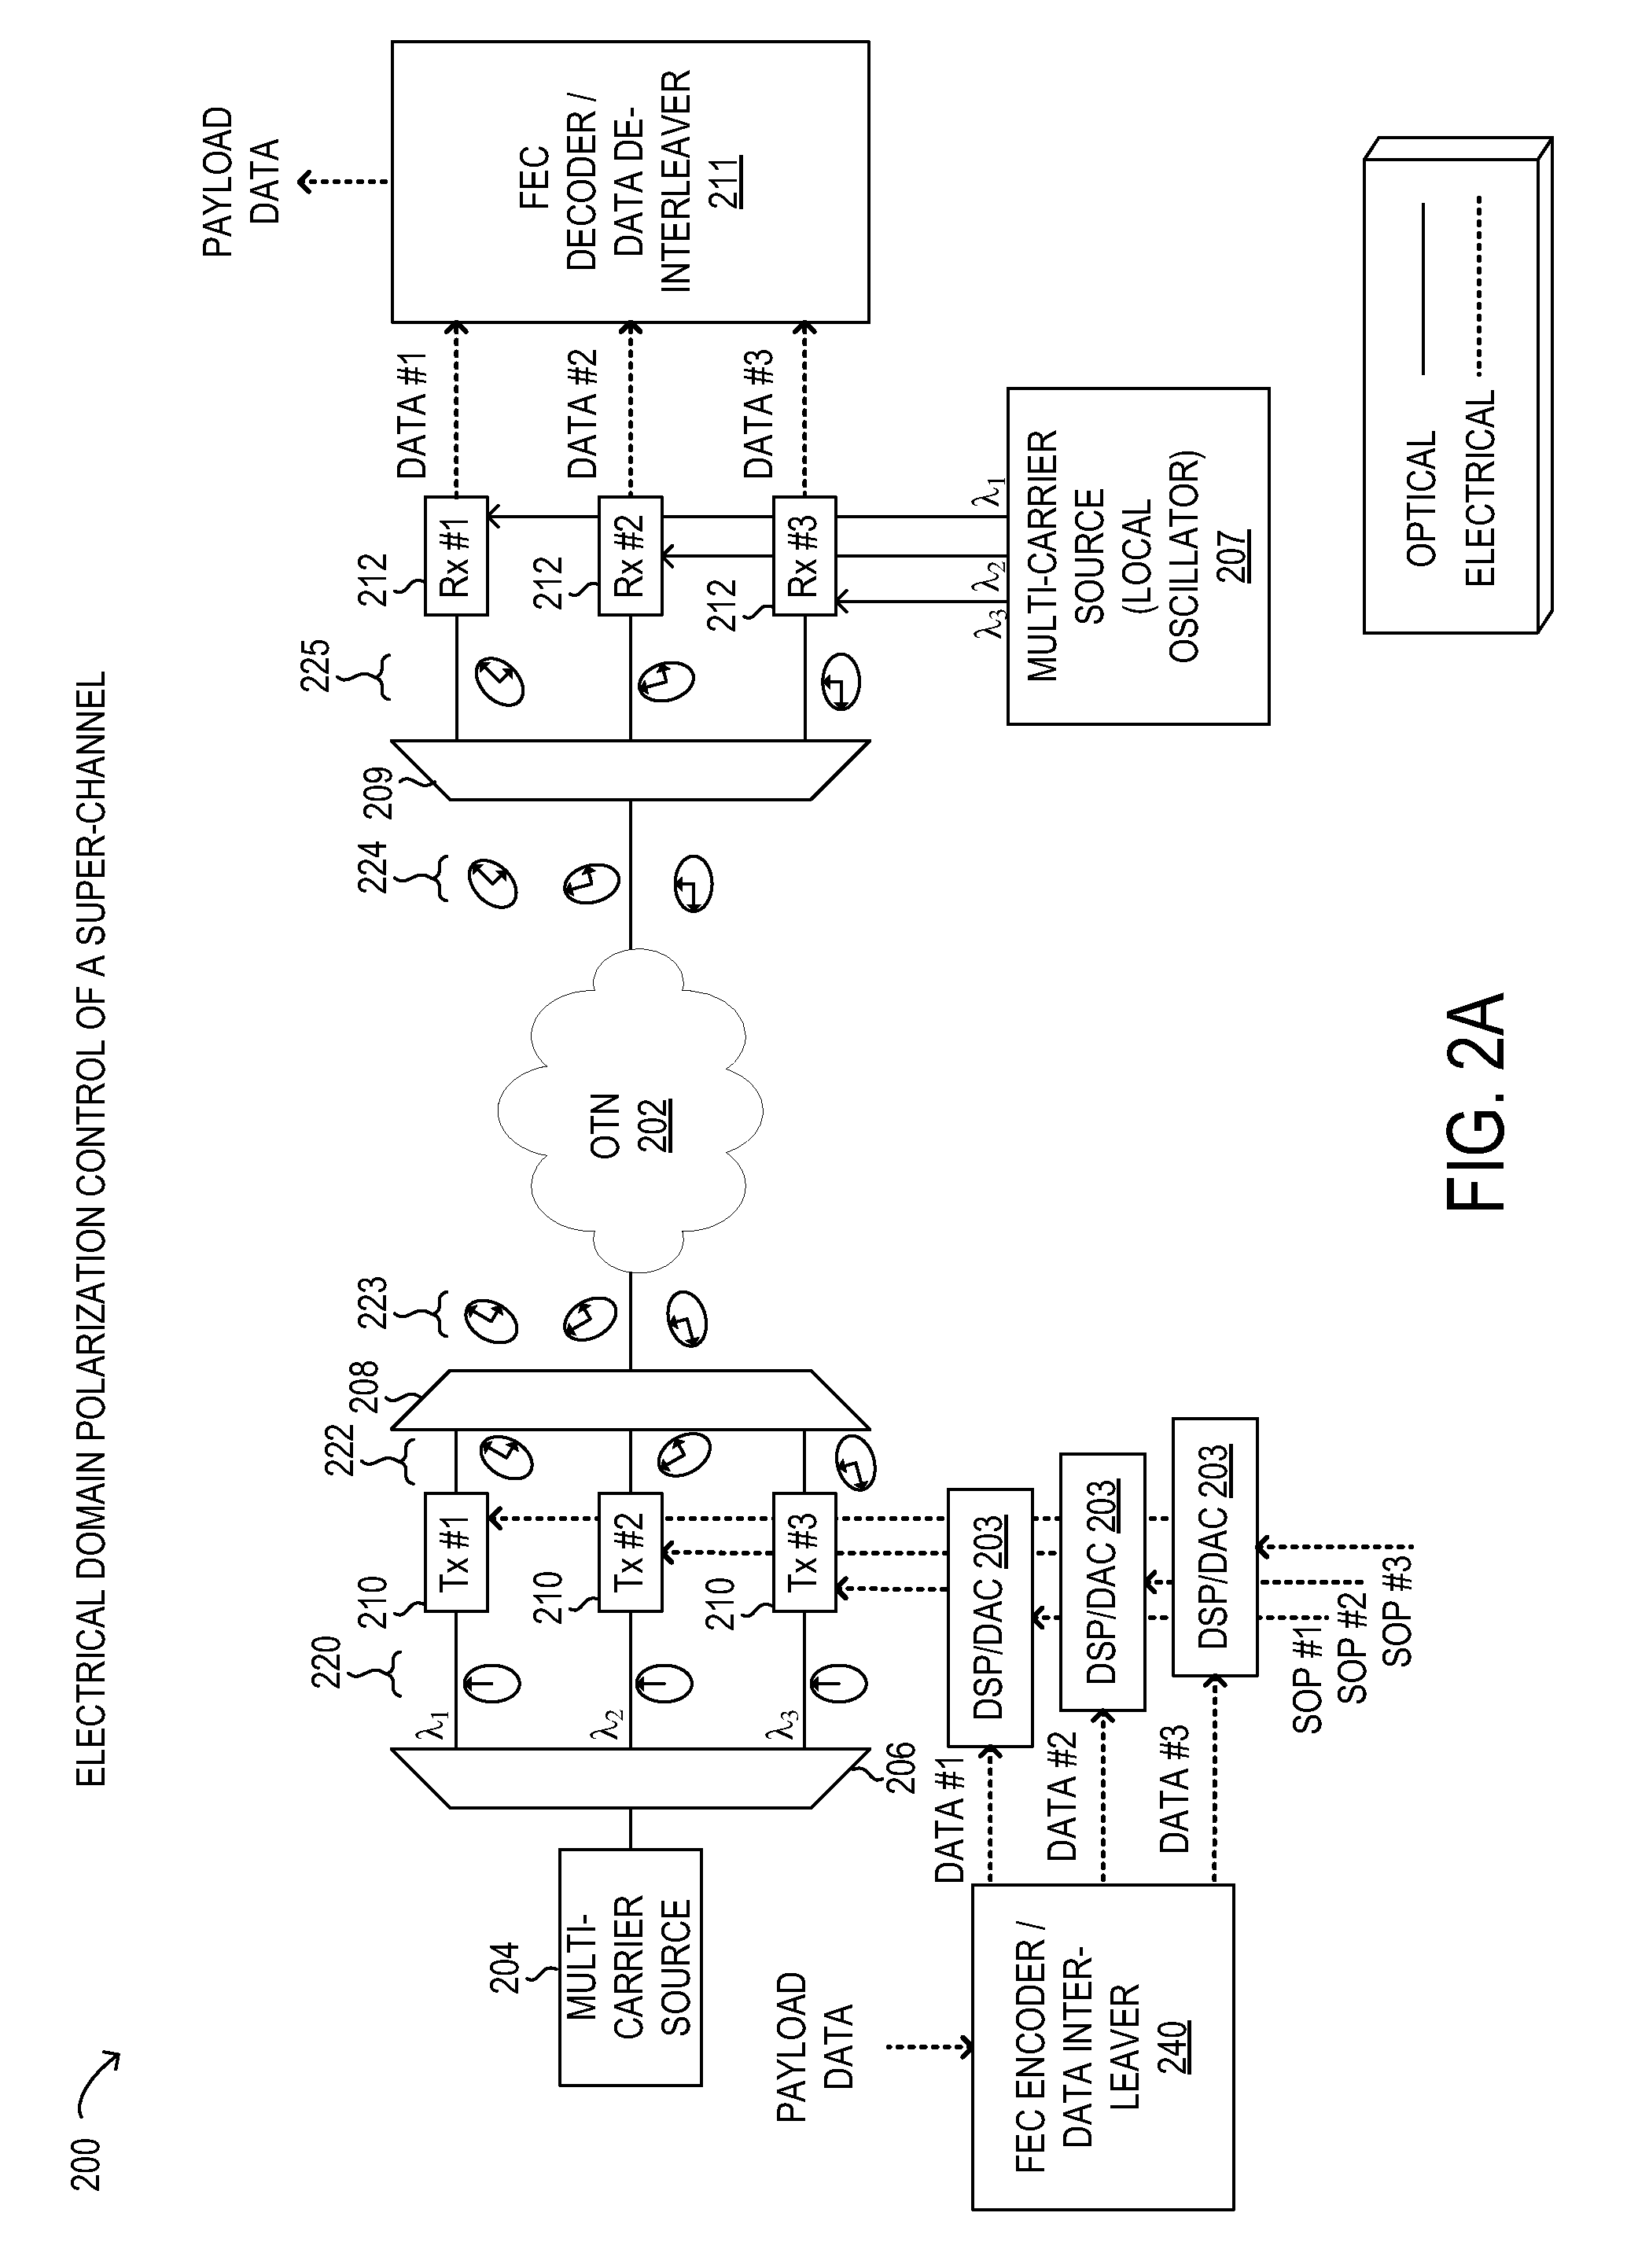 Mitigation of polarization dependent loss in optical multi-carrier/super-channel transmission